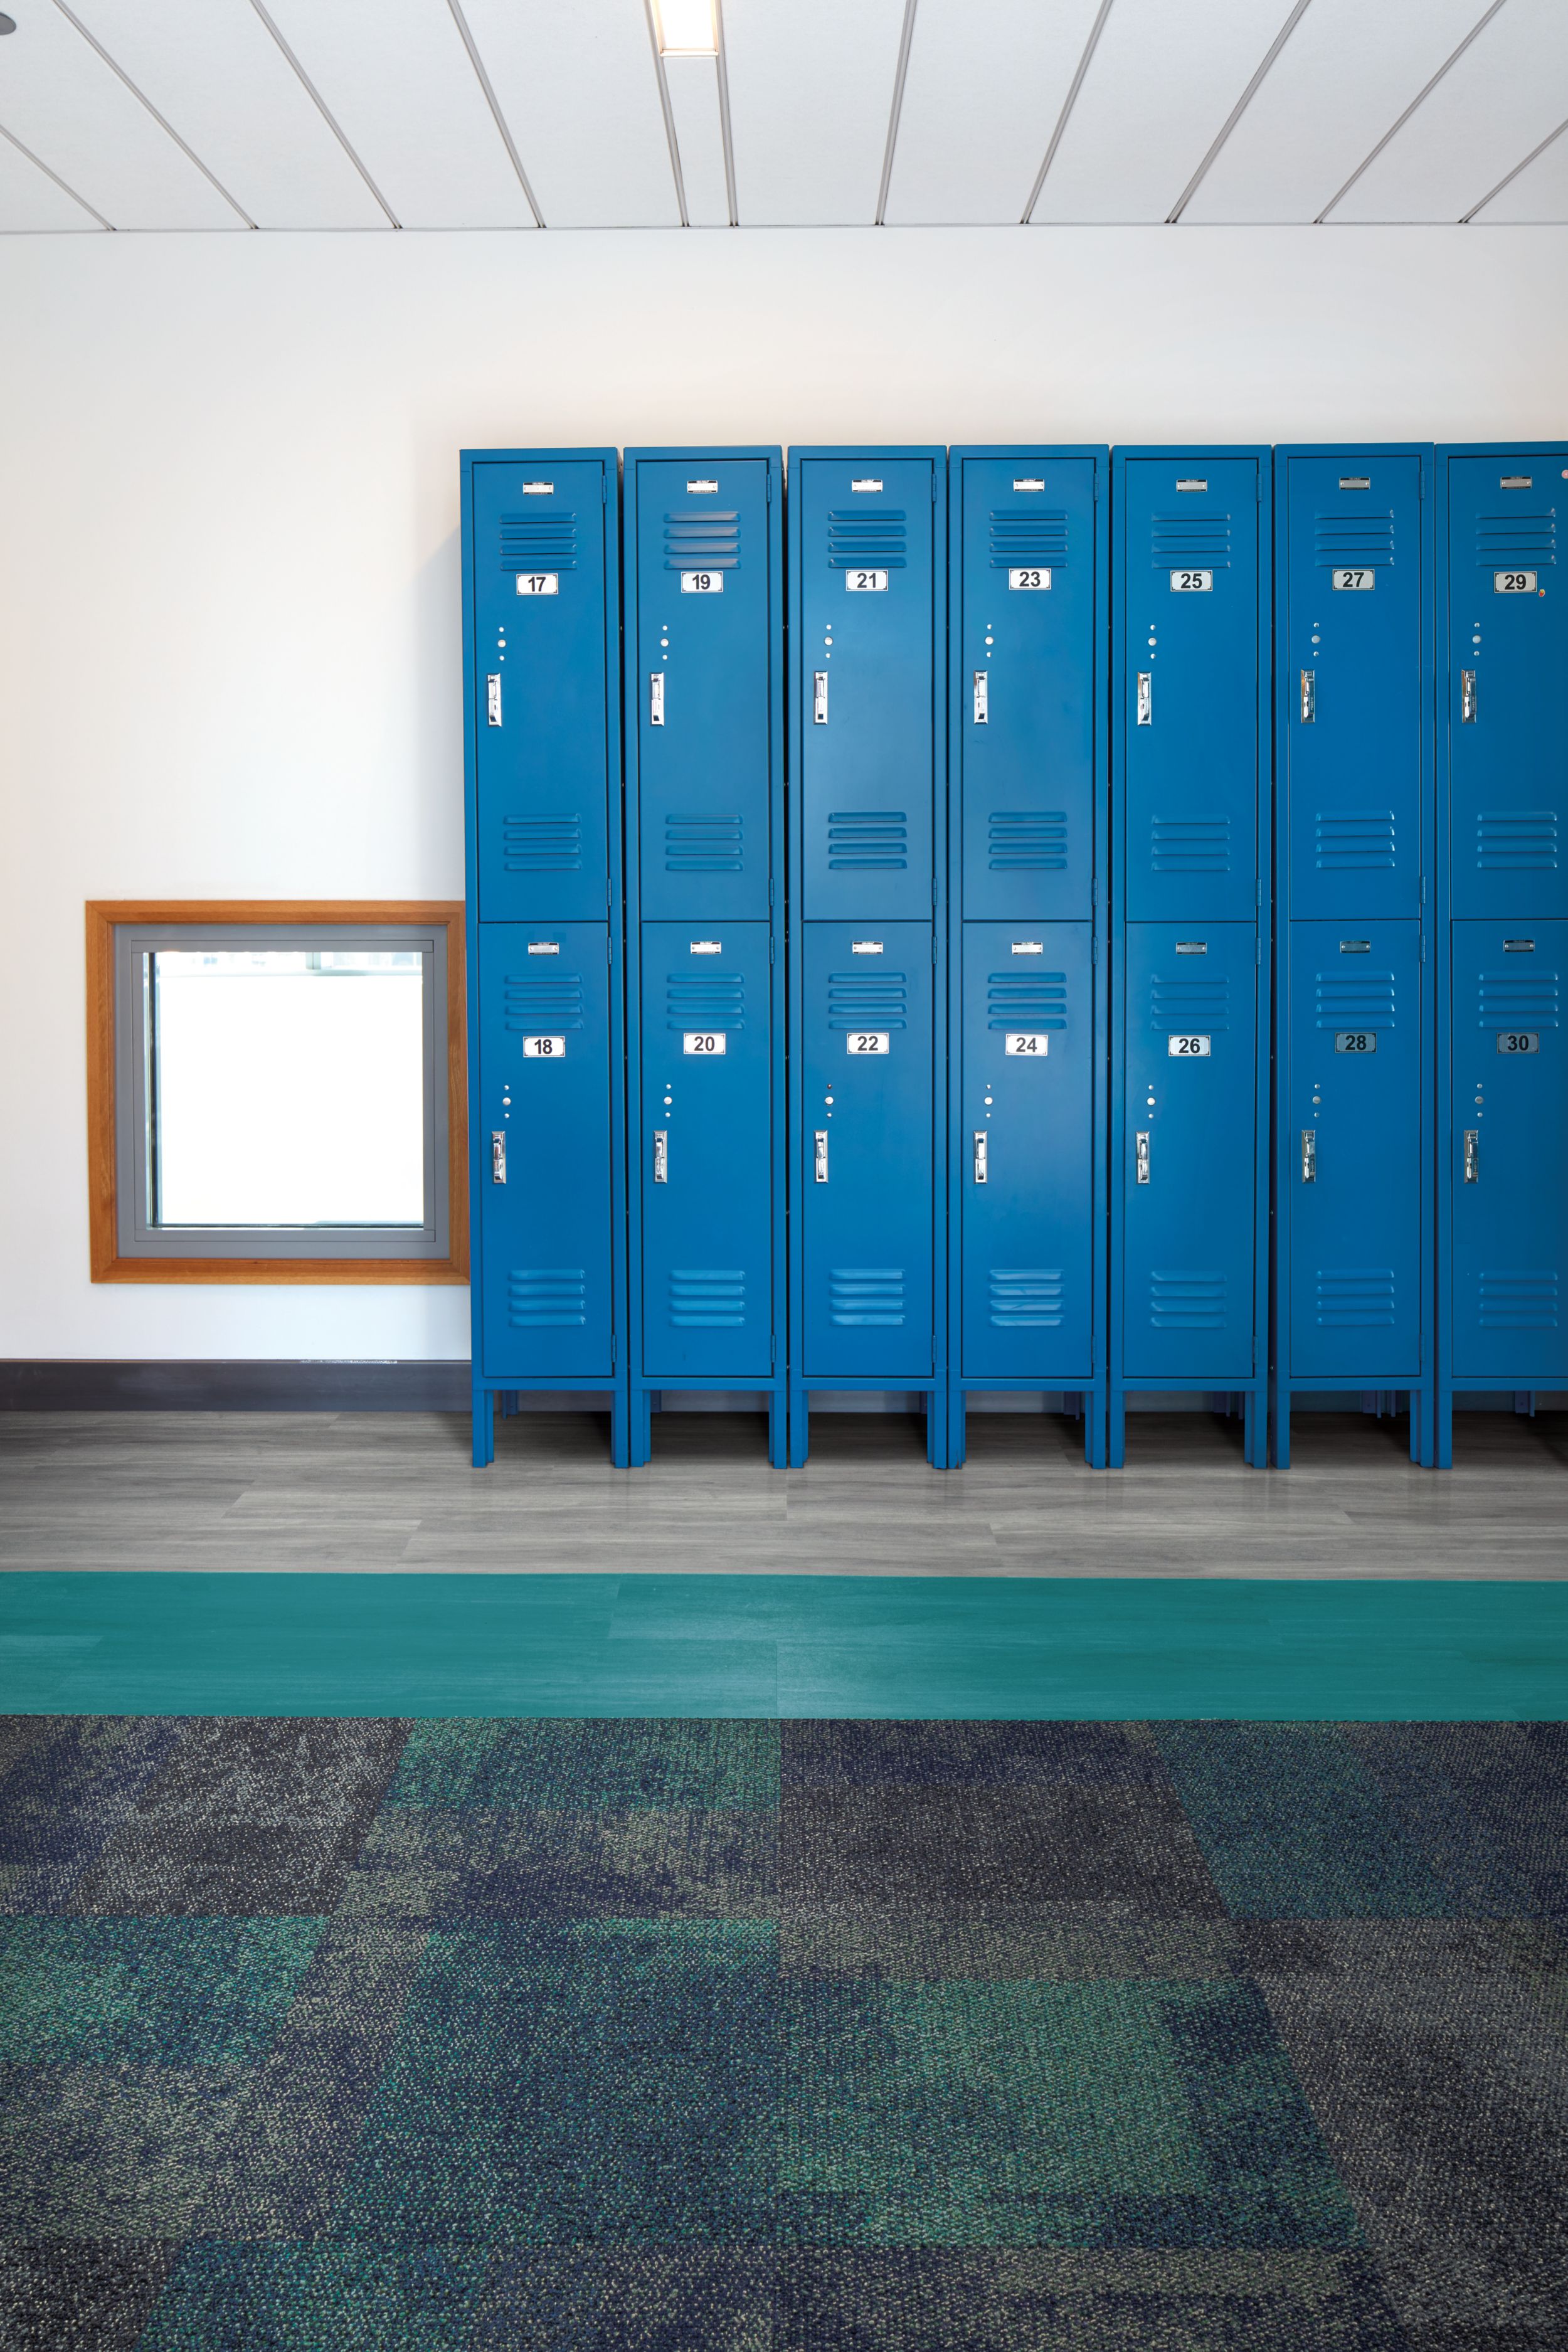 Interface Exposed carpet tile and Studio Set LVT in hallway with blue lockers numéro d’image 8